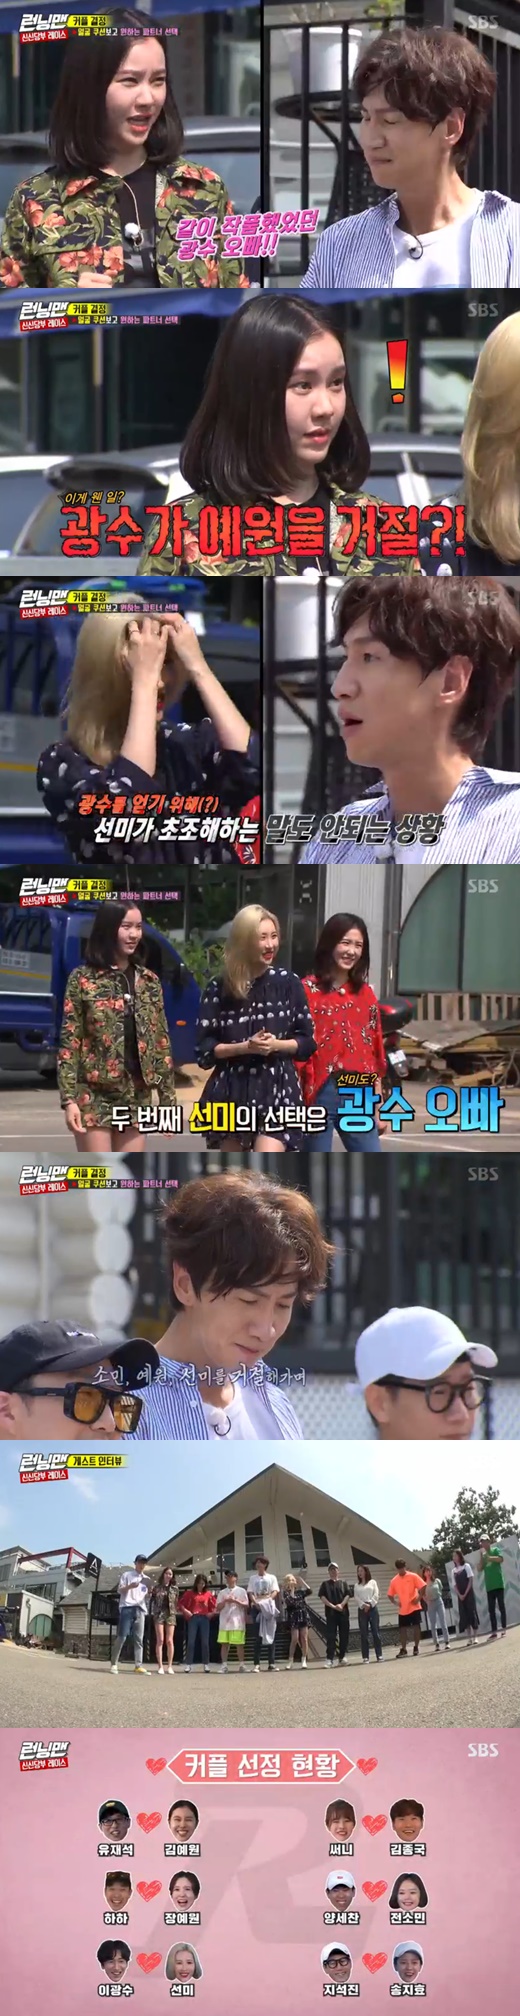 Running Man Lee Kwang-soo rejects Kim Ye-won and SunmiOn SBS Running Man broadcasted on the afternoon of the afternoon, Girls Generation Sunny, Singer Sunmi, Actor Kim Ye-won, and announcer Jang Ye-won appeared as guests.Lee Kwang-soo was rejected by Jeon So-min in the face cushion game that decided on the couple.Lee Kwang-soo was then named by Kim Ye-won, who rejected Kim Ye-won, saying, Can a man refuse, then I will refuse.Kim Ye-won said, What are you doing now? He laughed at Lee Kwang-soo, who is acquainted with him.Sunmi was also rejected by Lee Kwang-soo; turning around, Sunmi again Choices Lee Kwang-soo, who eventually became a mate.On the other hand, Sunmi caught the attention of the powerful stage of the new song Flying.